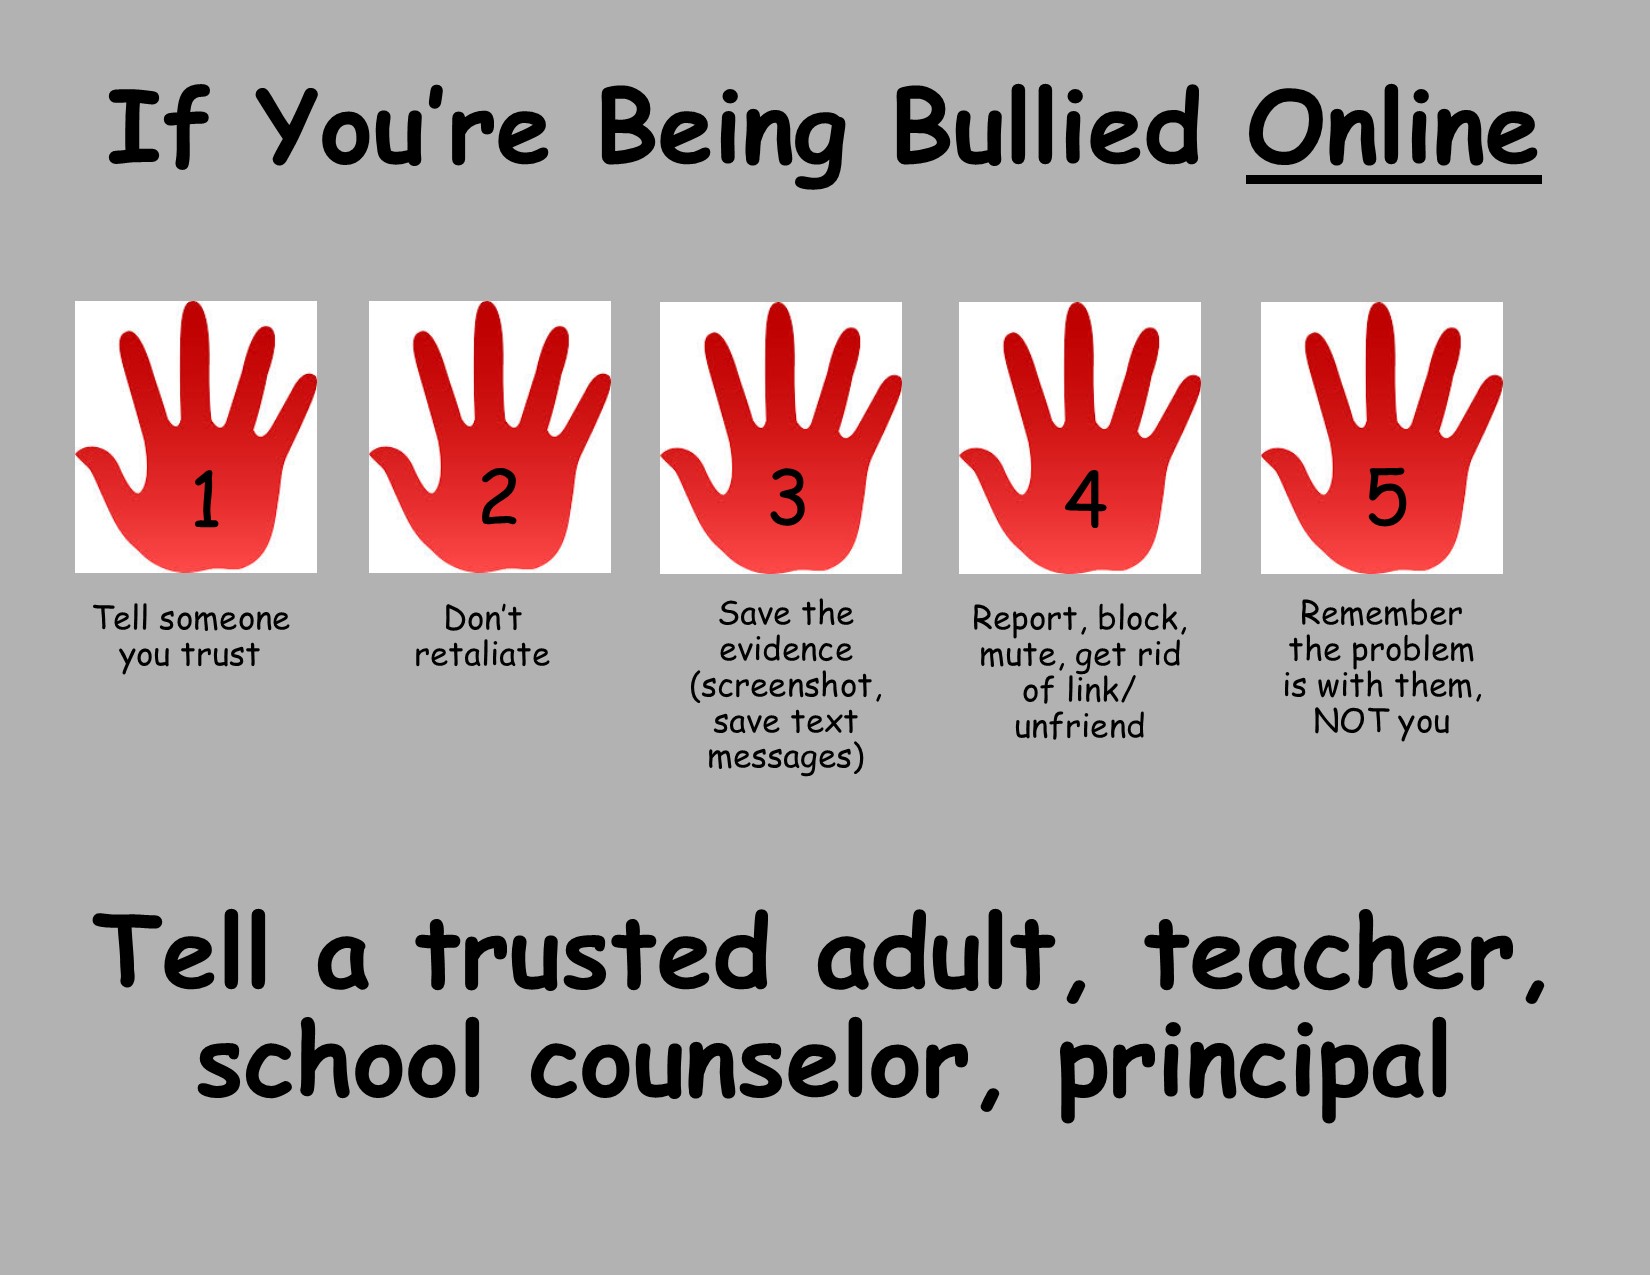 If you're being bullied online chart, "tell a trusted adult, teacher, school counselor, principal"